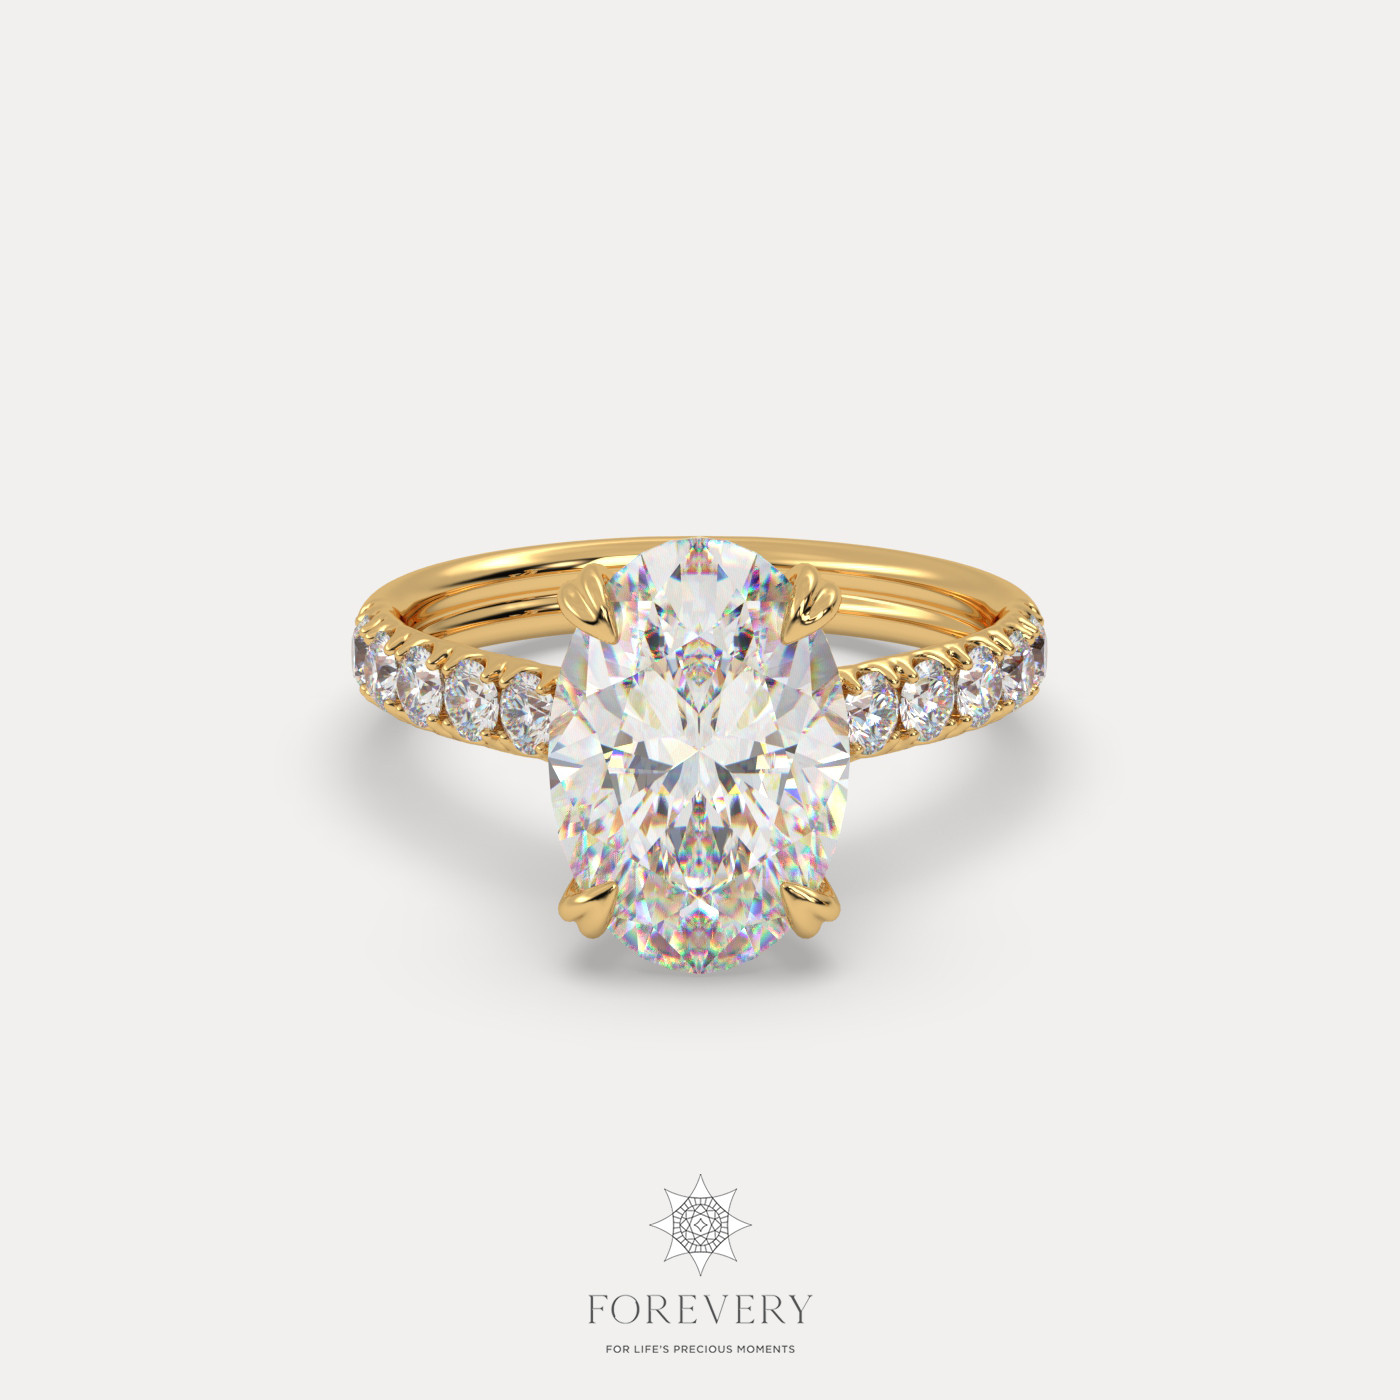 18K YELLOW GOLD Oval Cut Pave-Style Diamond Engagement Ring